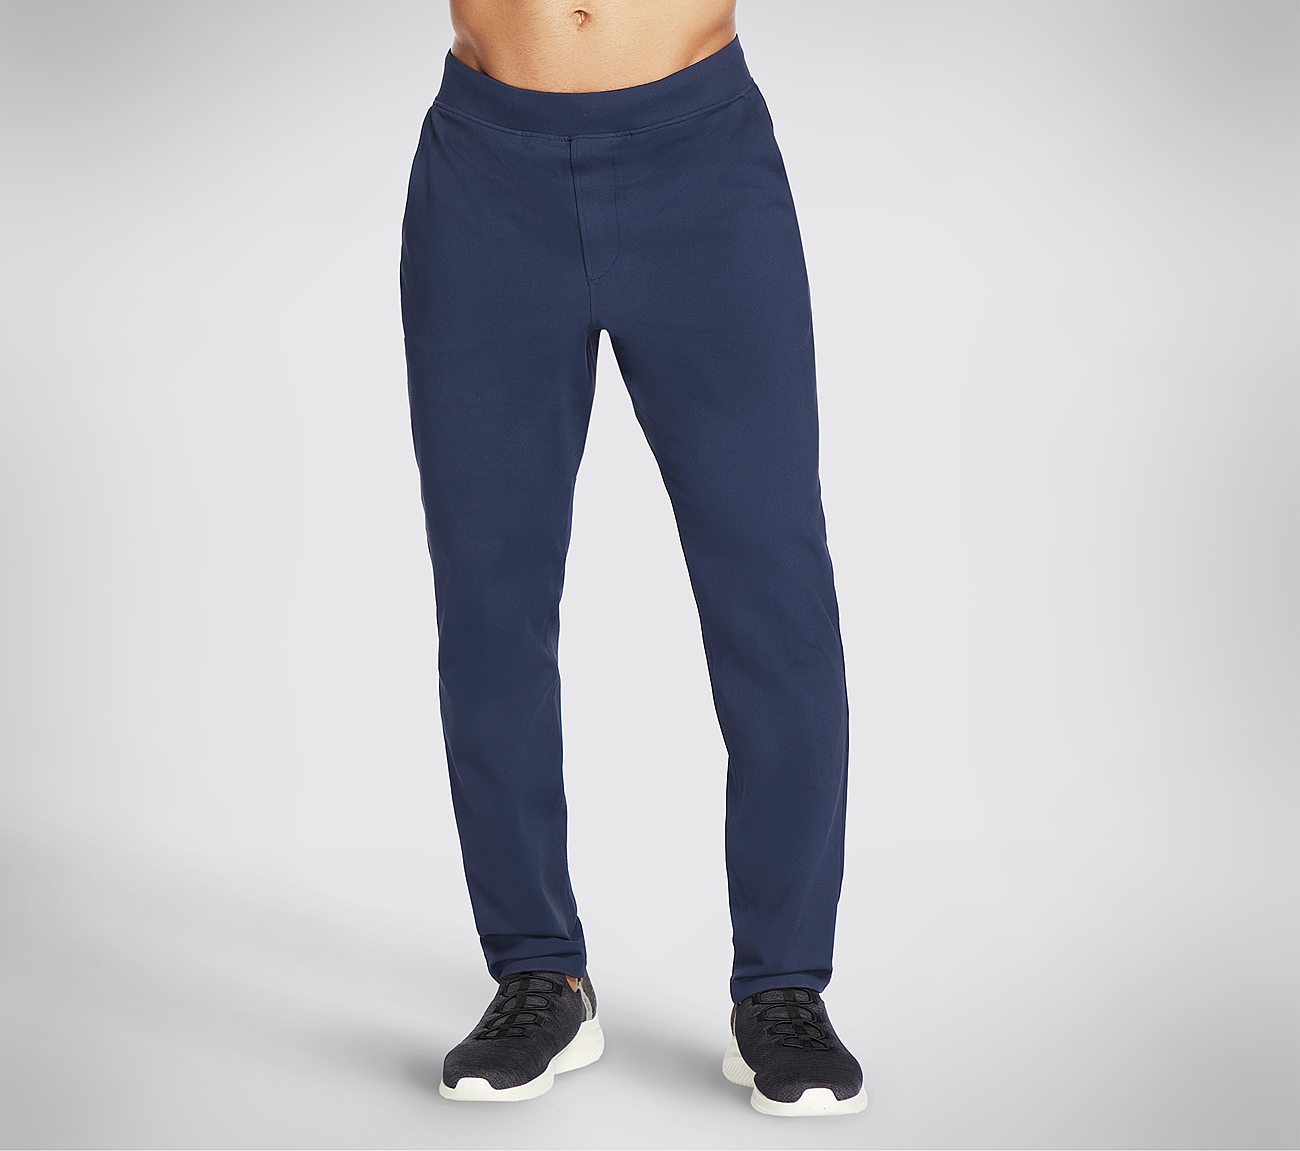 THE GOWALK PANT CONTROLLER, NNNAVY Apparels Lateral View